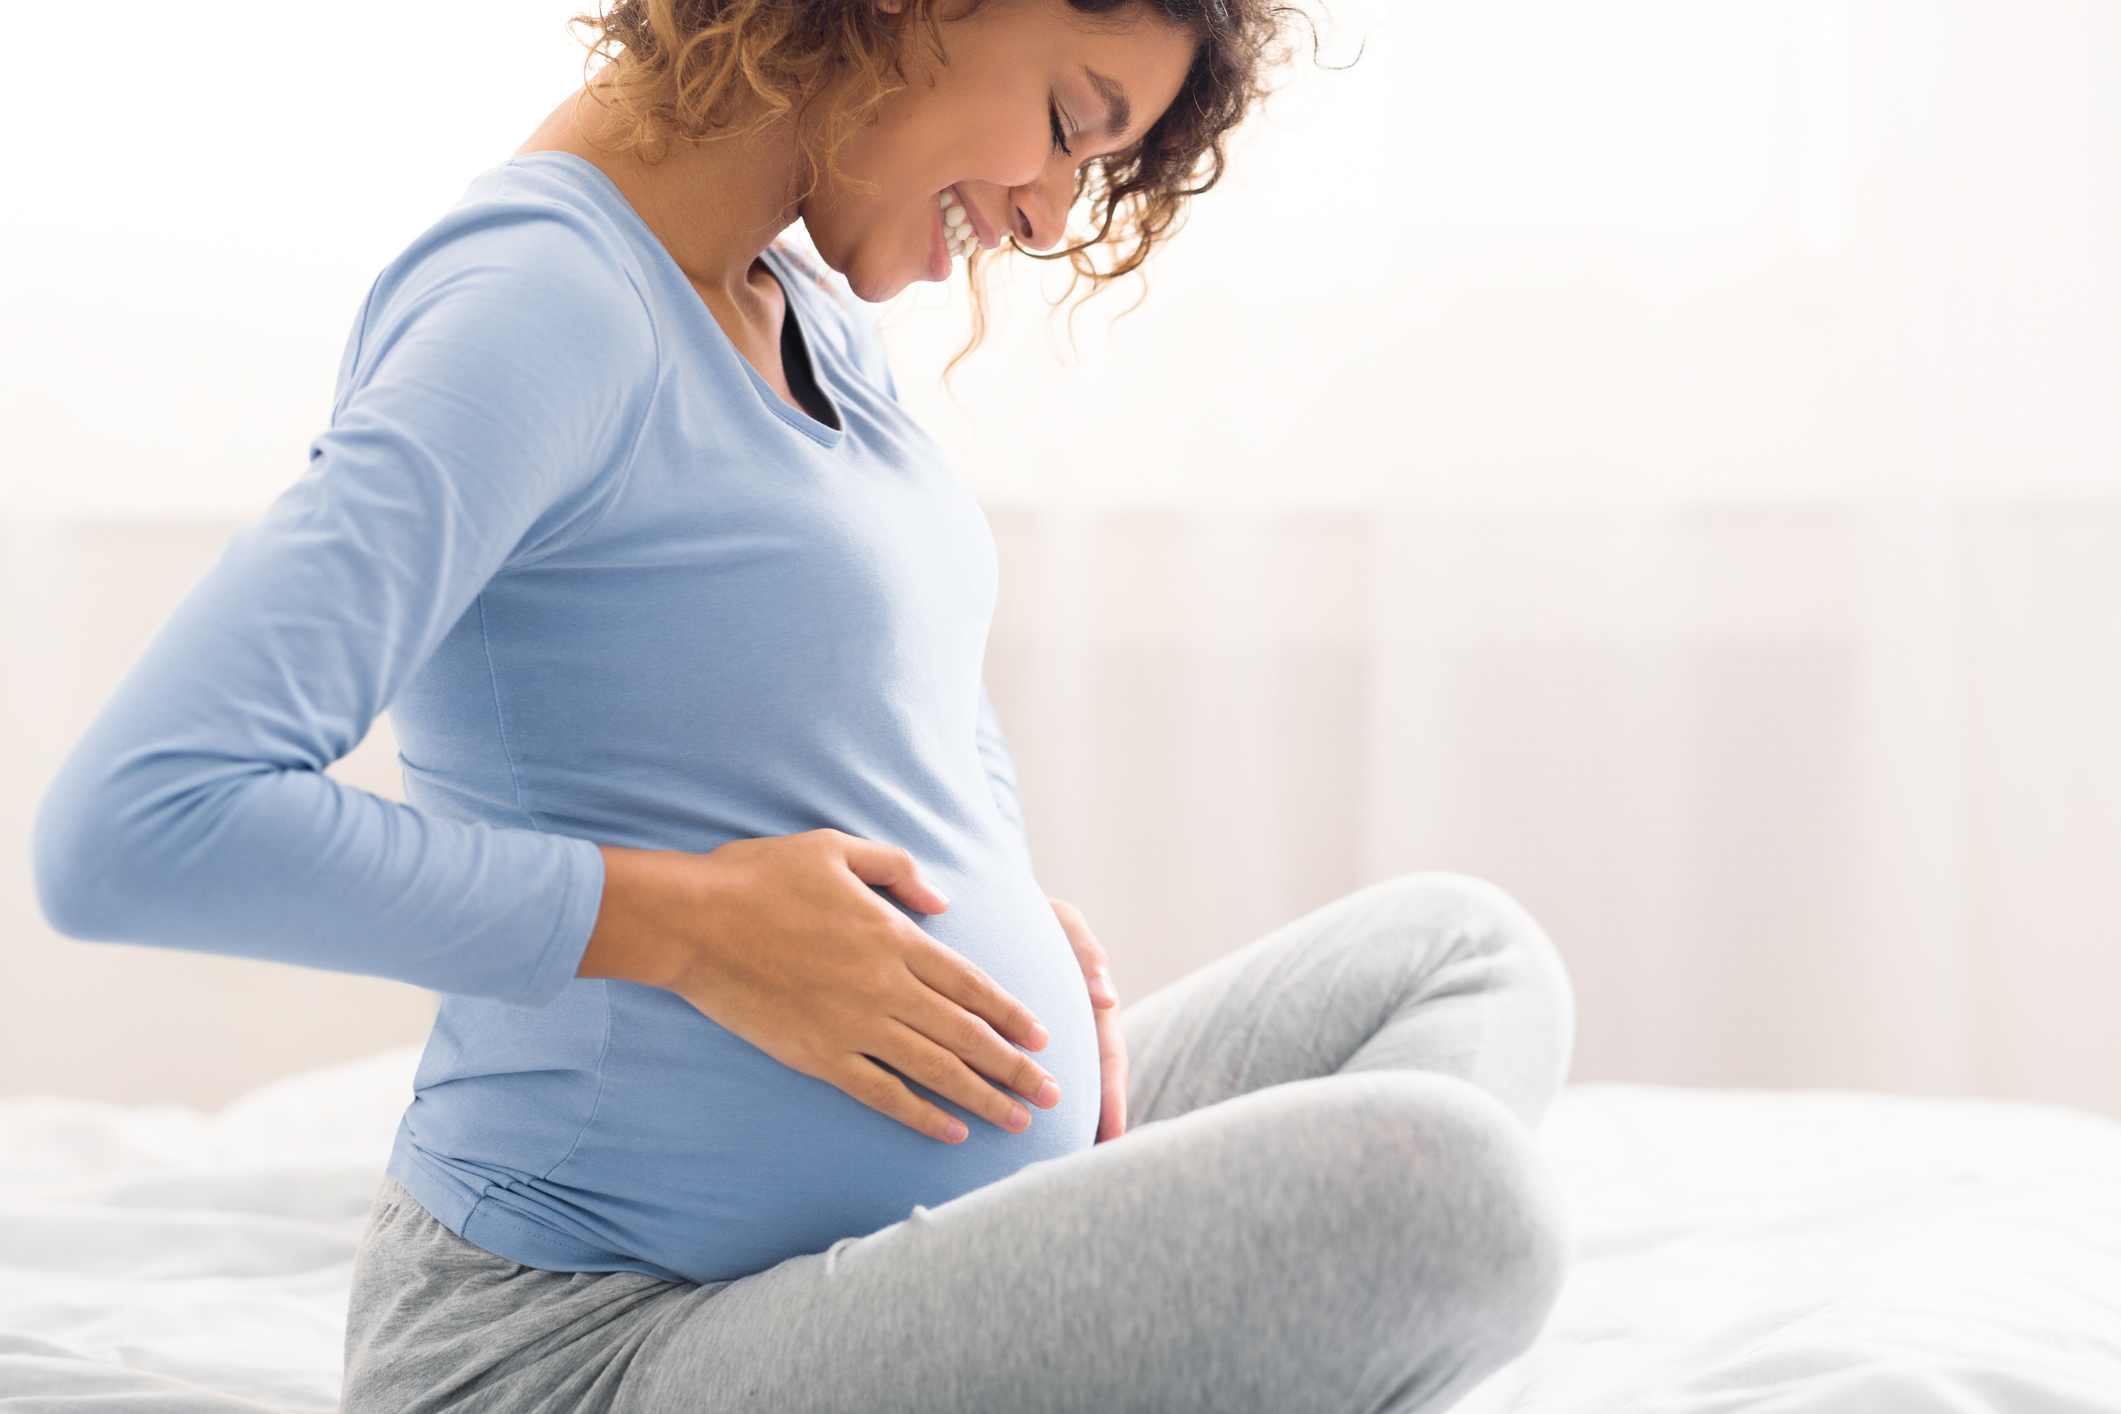 pregnant woman sitting on a bed smiling and holding her stomach